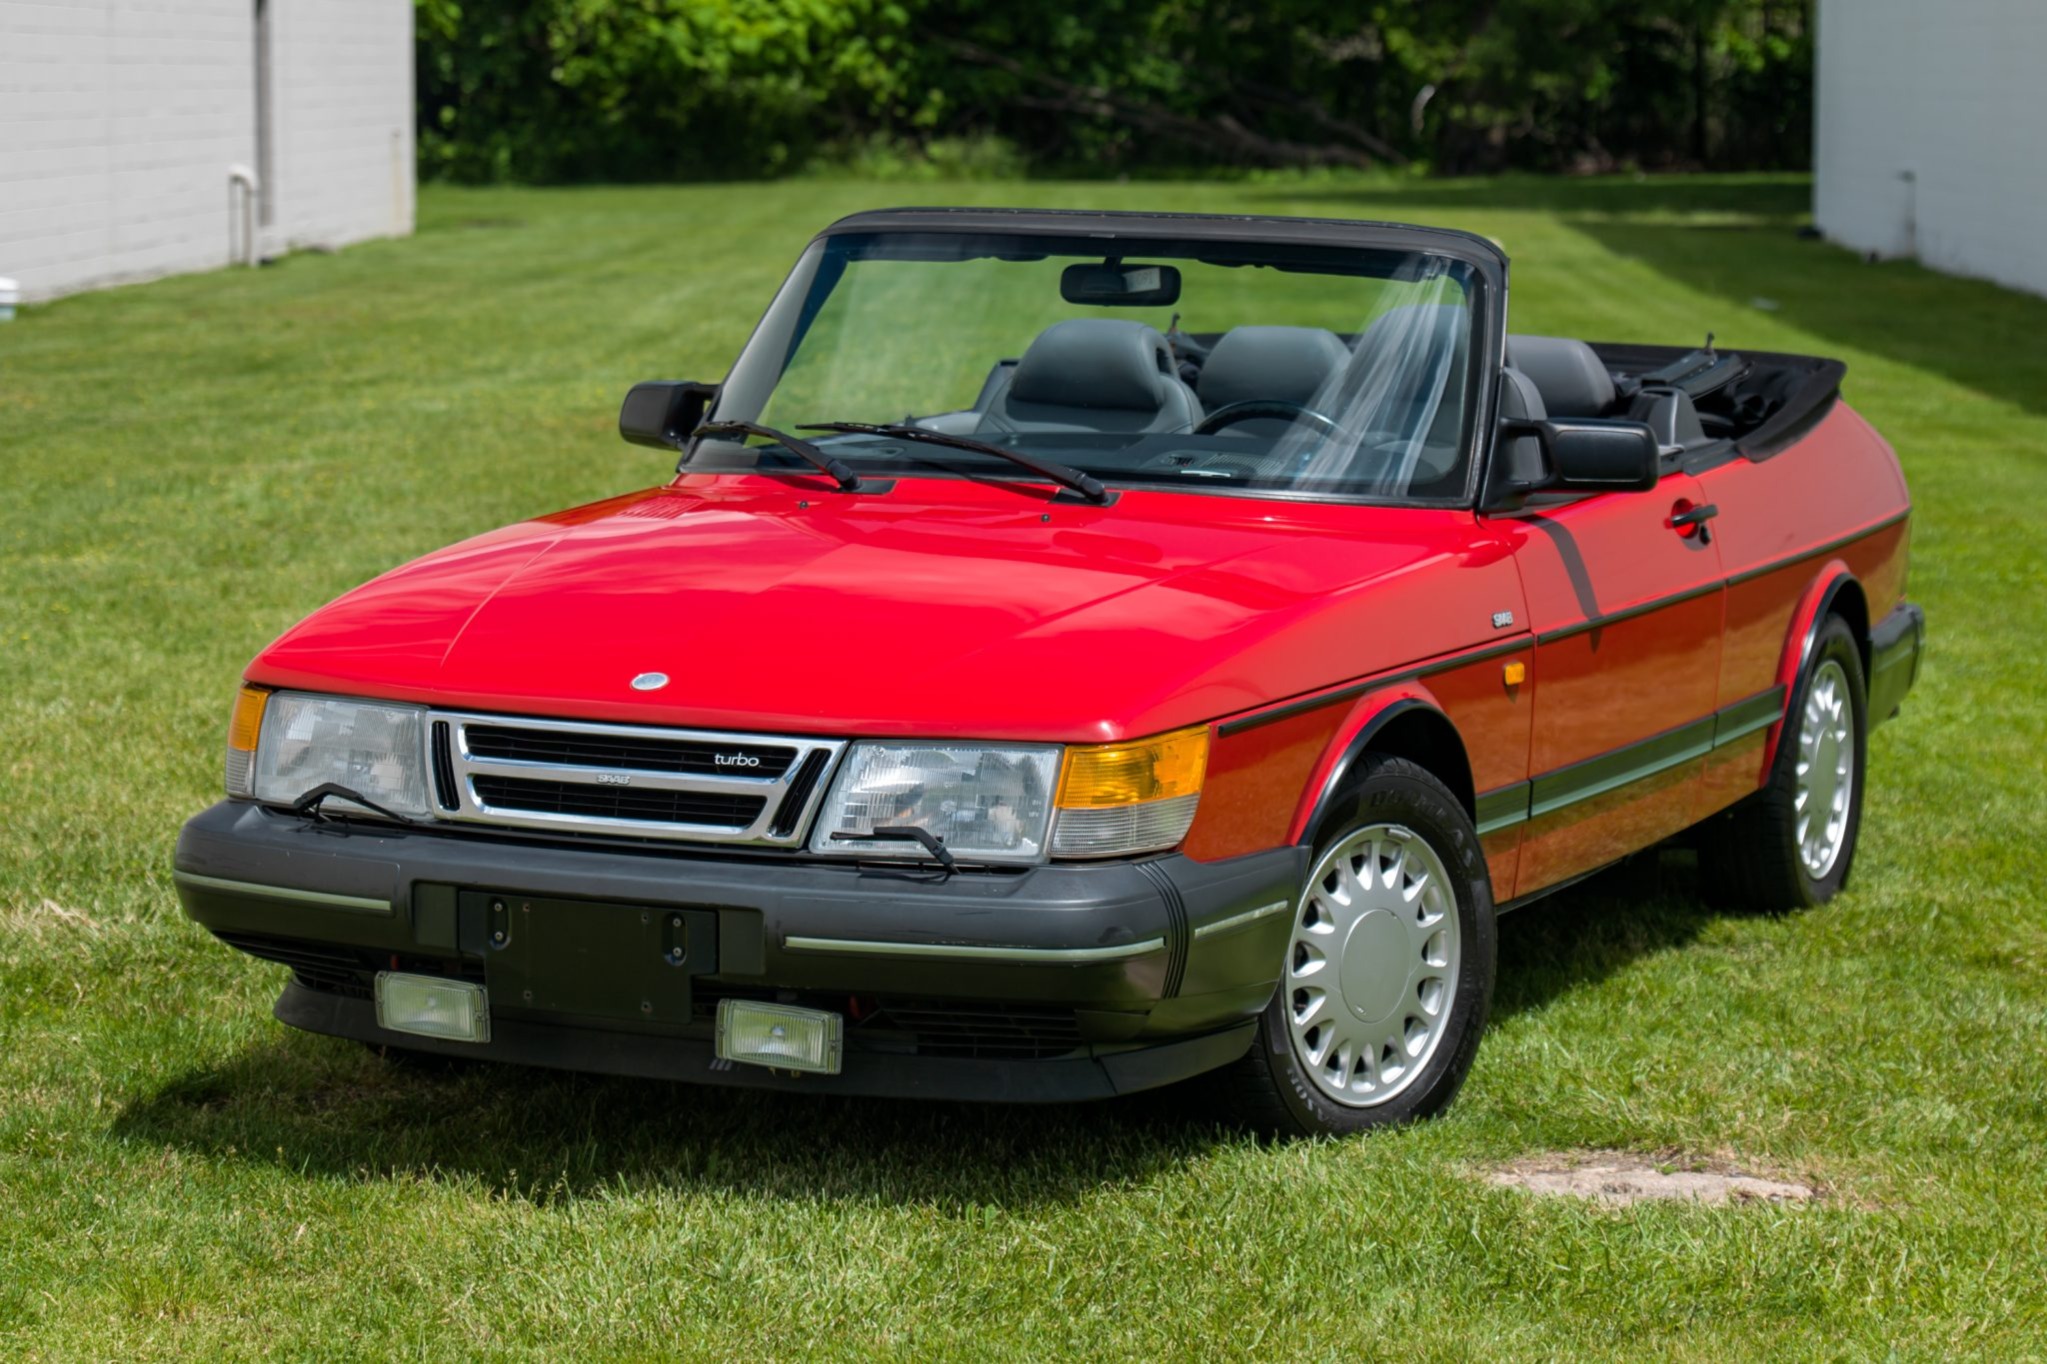 Used 40k-Mile 1991 Saab 900 Turbo Convertible 5-Speed Review